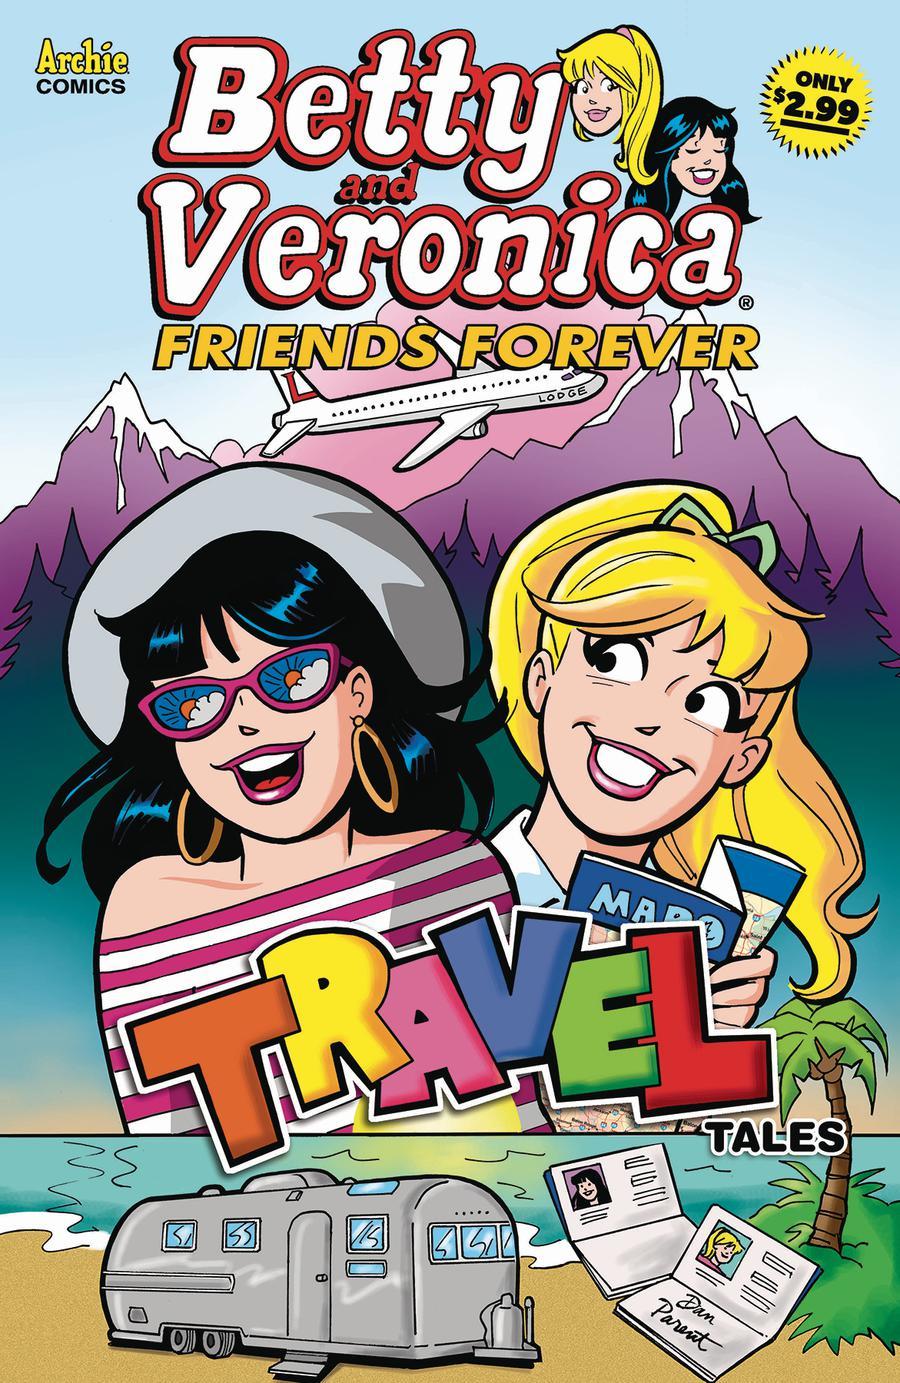 Betty And Veronica Friends Forever Vol. 1 #2